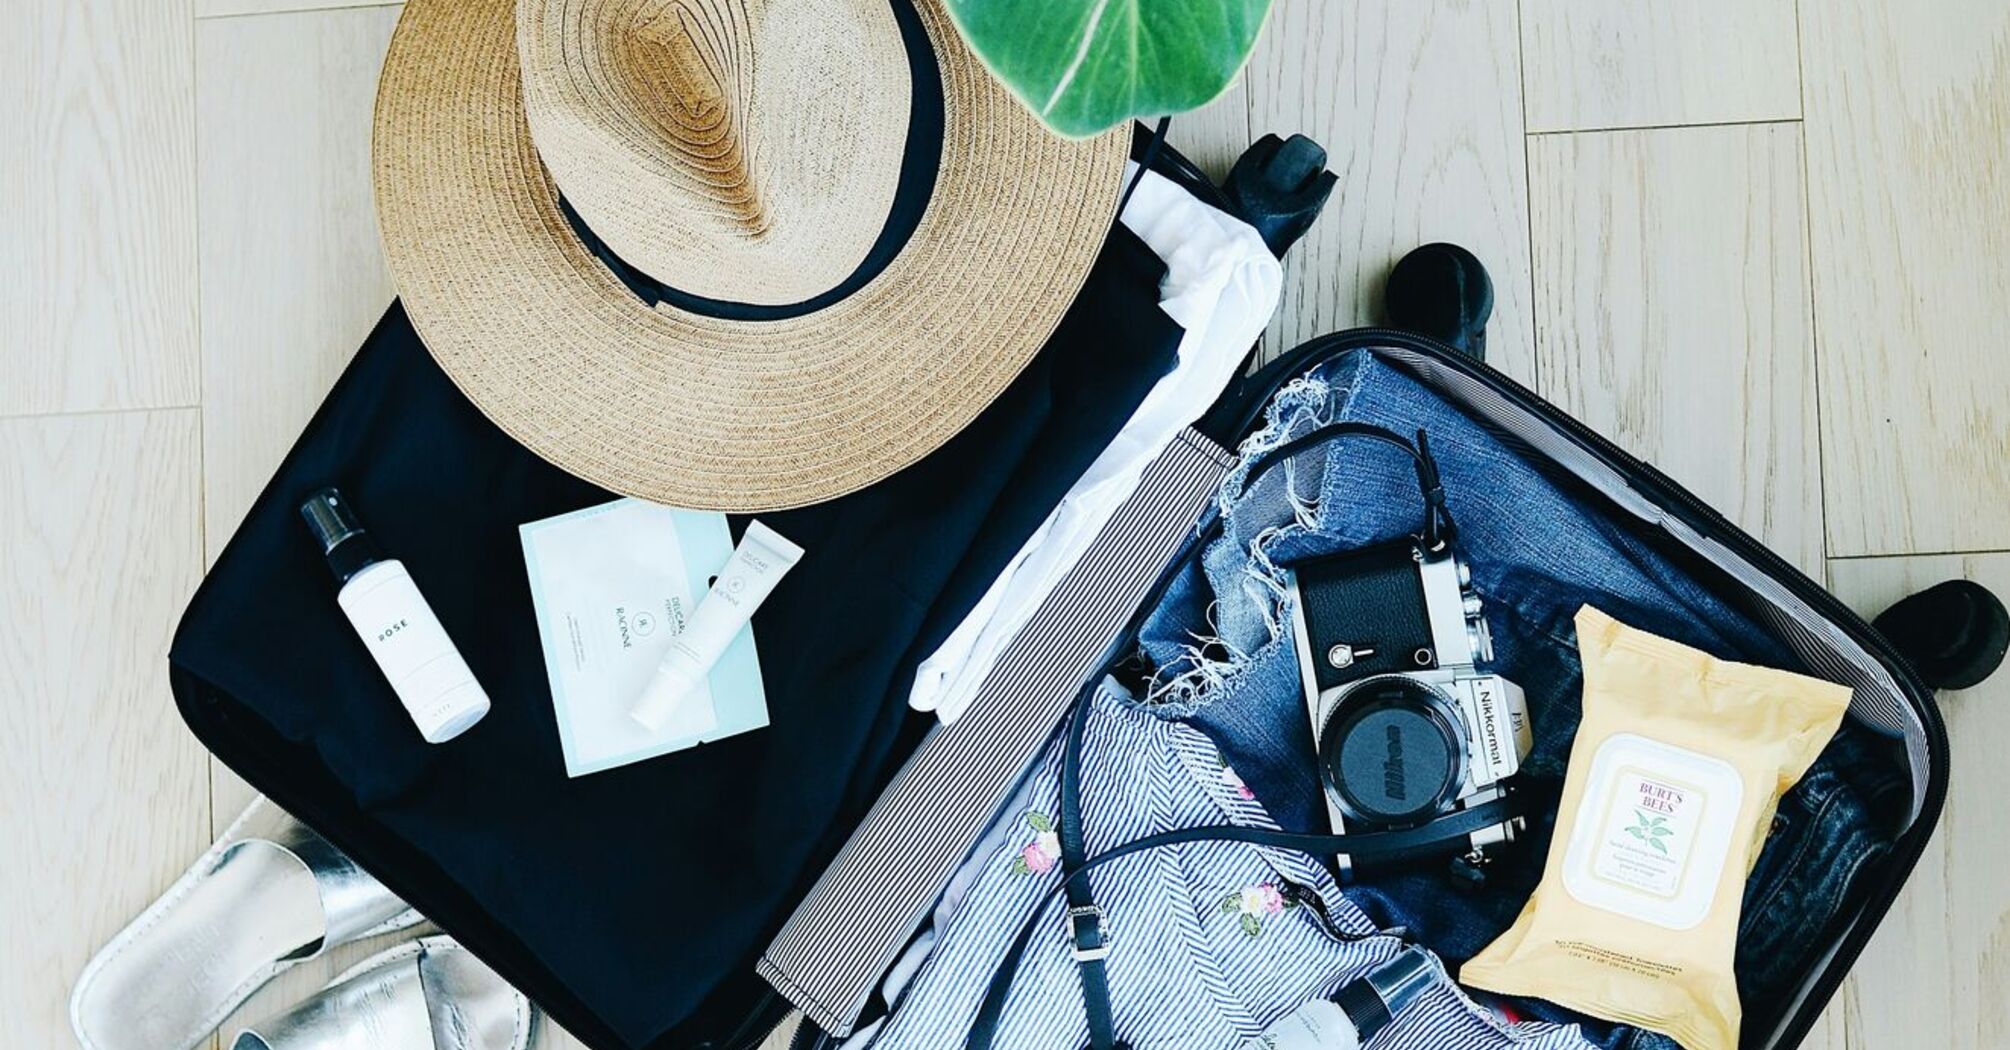 Open suitcase with clothing, camera, shoes, and toiletries, next to a wide-brimmed hat and a plant on a wooden floor